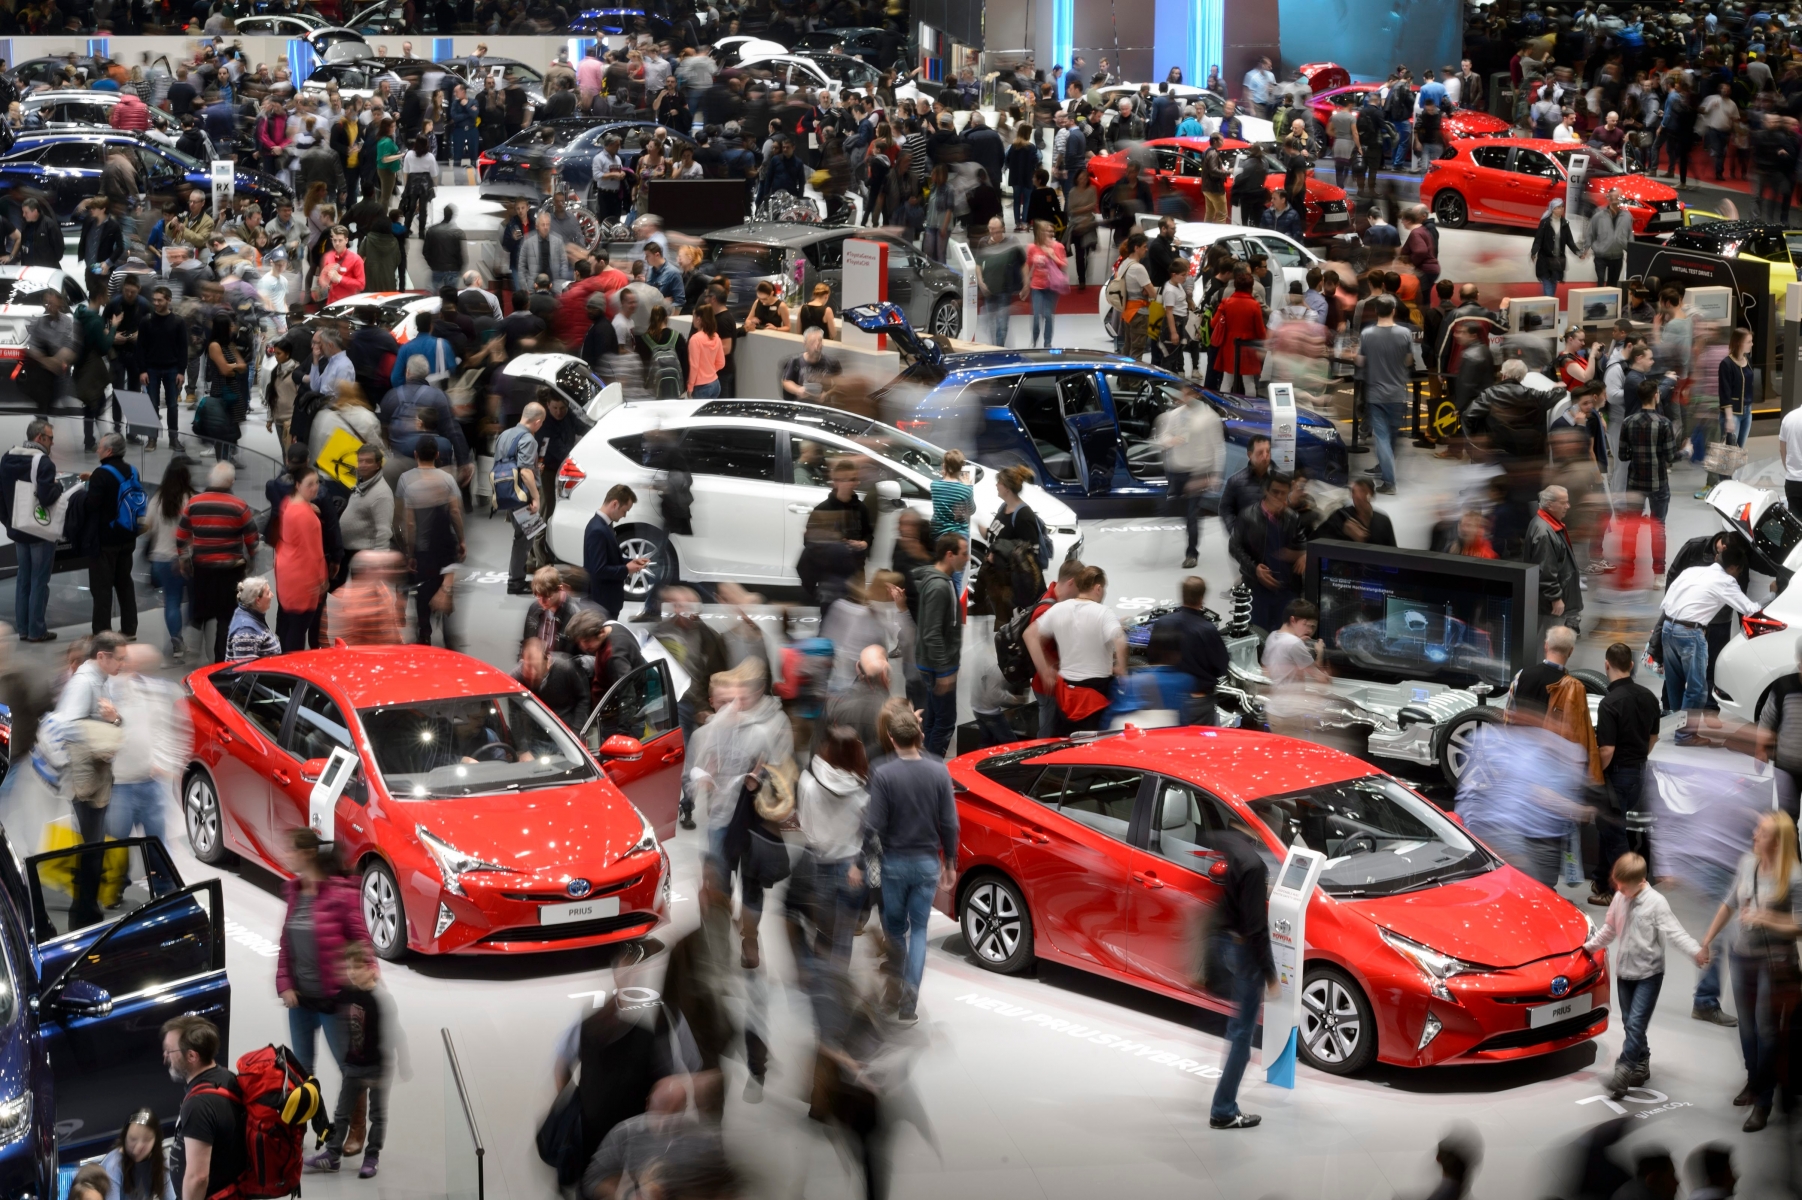 Visitors gather at the Honda booth, during the last day of the 86th Geneva International Motor Show in Geneva, Switzerland, Sunday, March 13, 2016. The Motor Show took place from 3rd to 13th March and presented more than 200 exhibitors and more than 120 world and European premieres.  (KEYSTONE/Martial Trezzini) SCHWEIZ 86. AUTOMOBILSALON GENF 2016